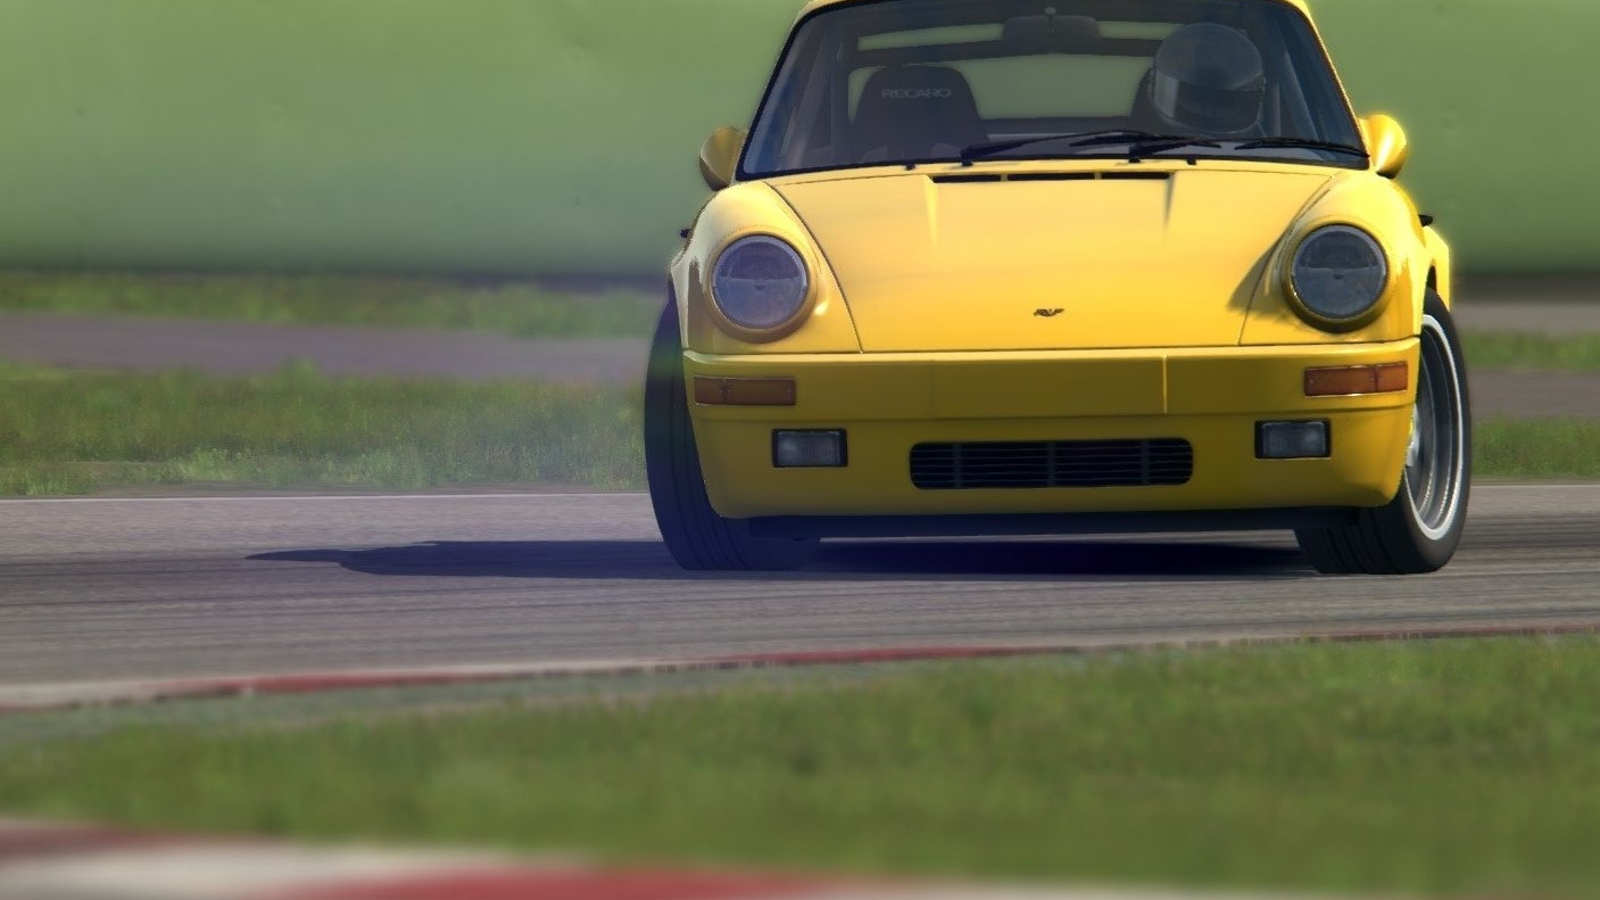 Assetto Corsa 2021 Traffic patch for ACP Quattro WIP test 